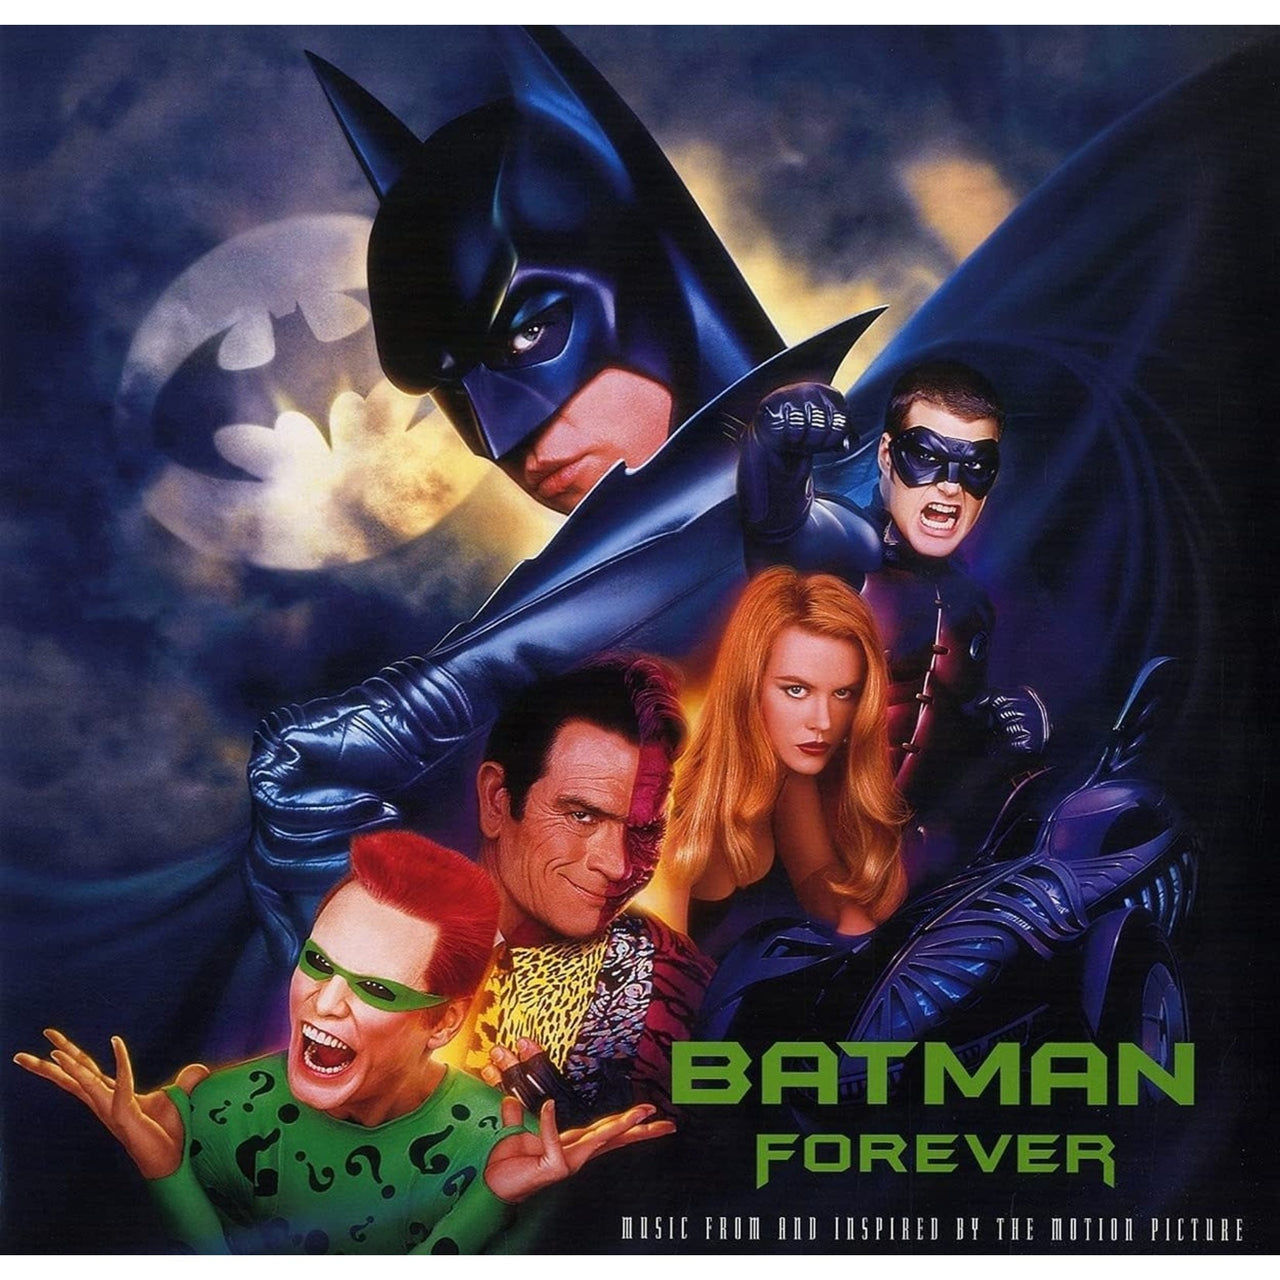 BATMAN FOREVER (MUSIC FROM AND INSPIRED BY THE MOTION PICTURE)